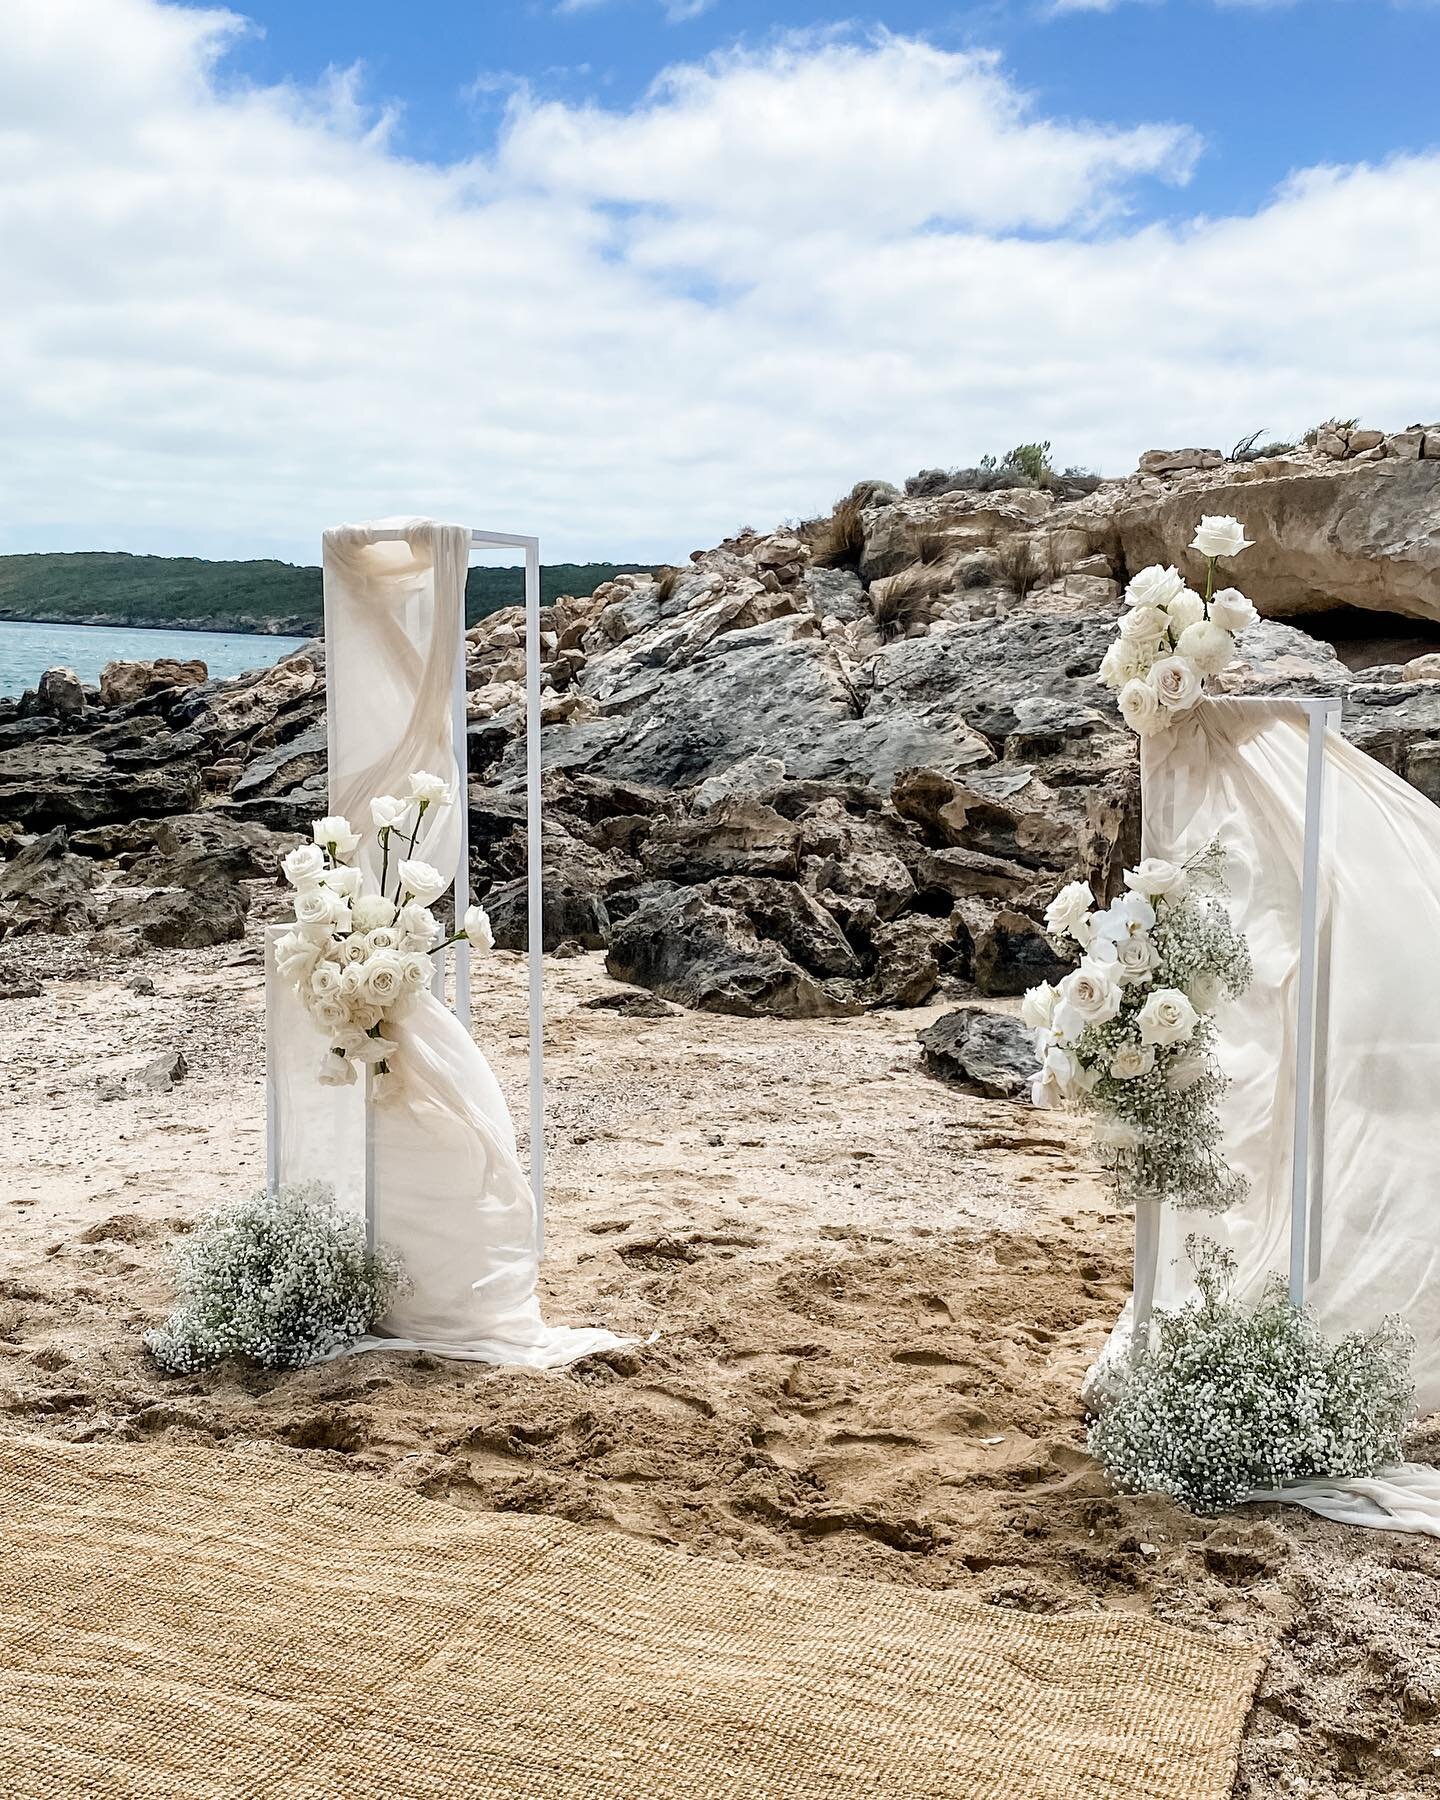 Ceremony florals for Kaitlyn + Brett 🤍 

Full of playa Blanca roses, gypsophila, orchids, chrysanthemums and dahlias. 

The addition of fabric gives that extra little drama to the flowers and worked perfectly with the coastline backdrop.